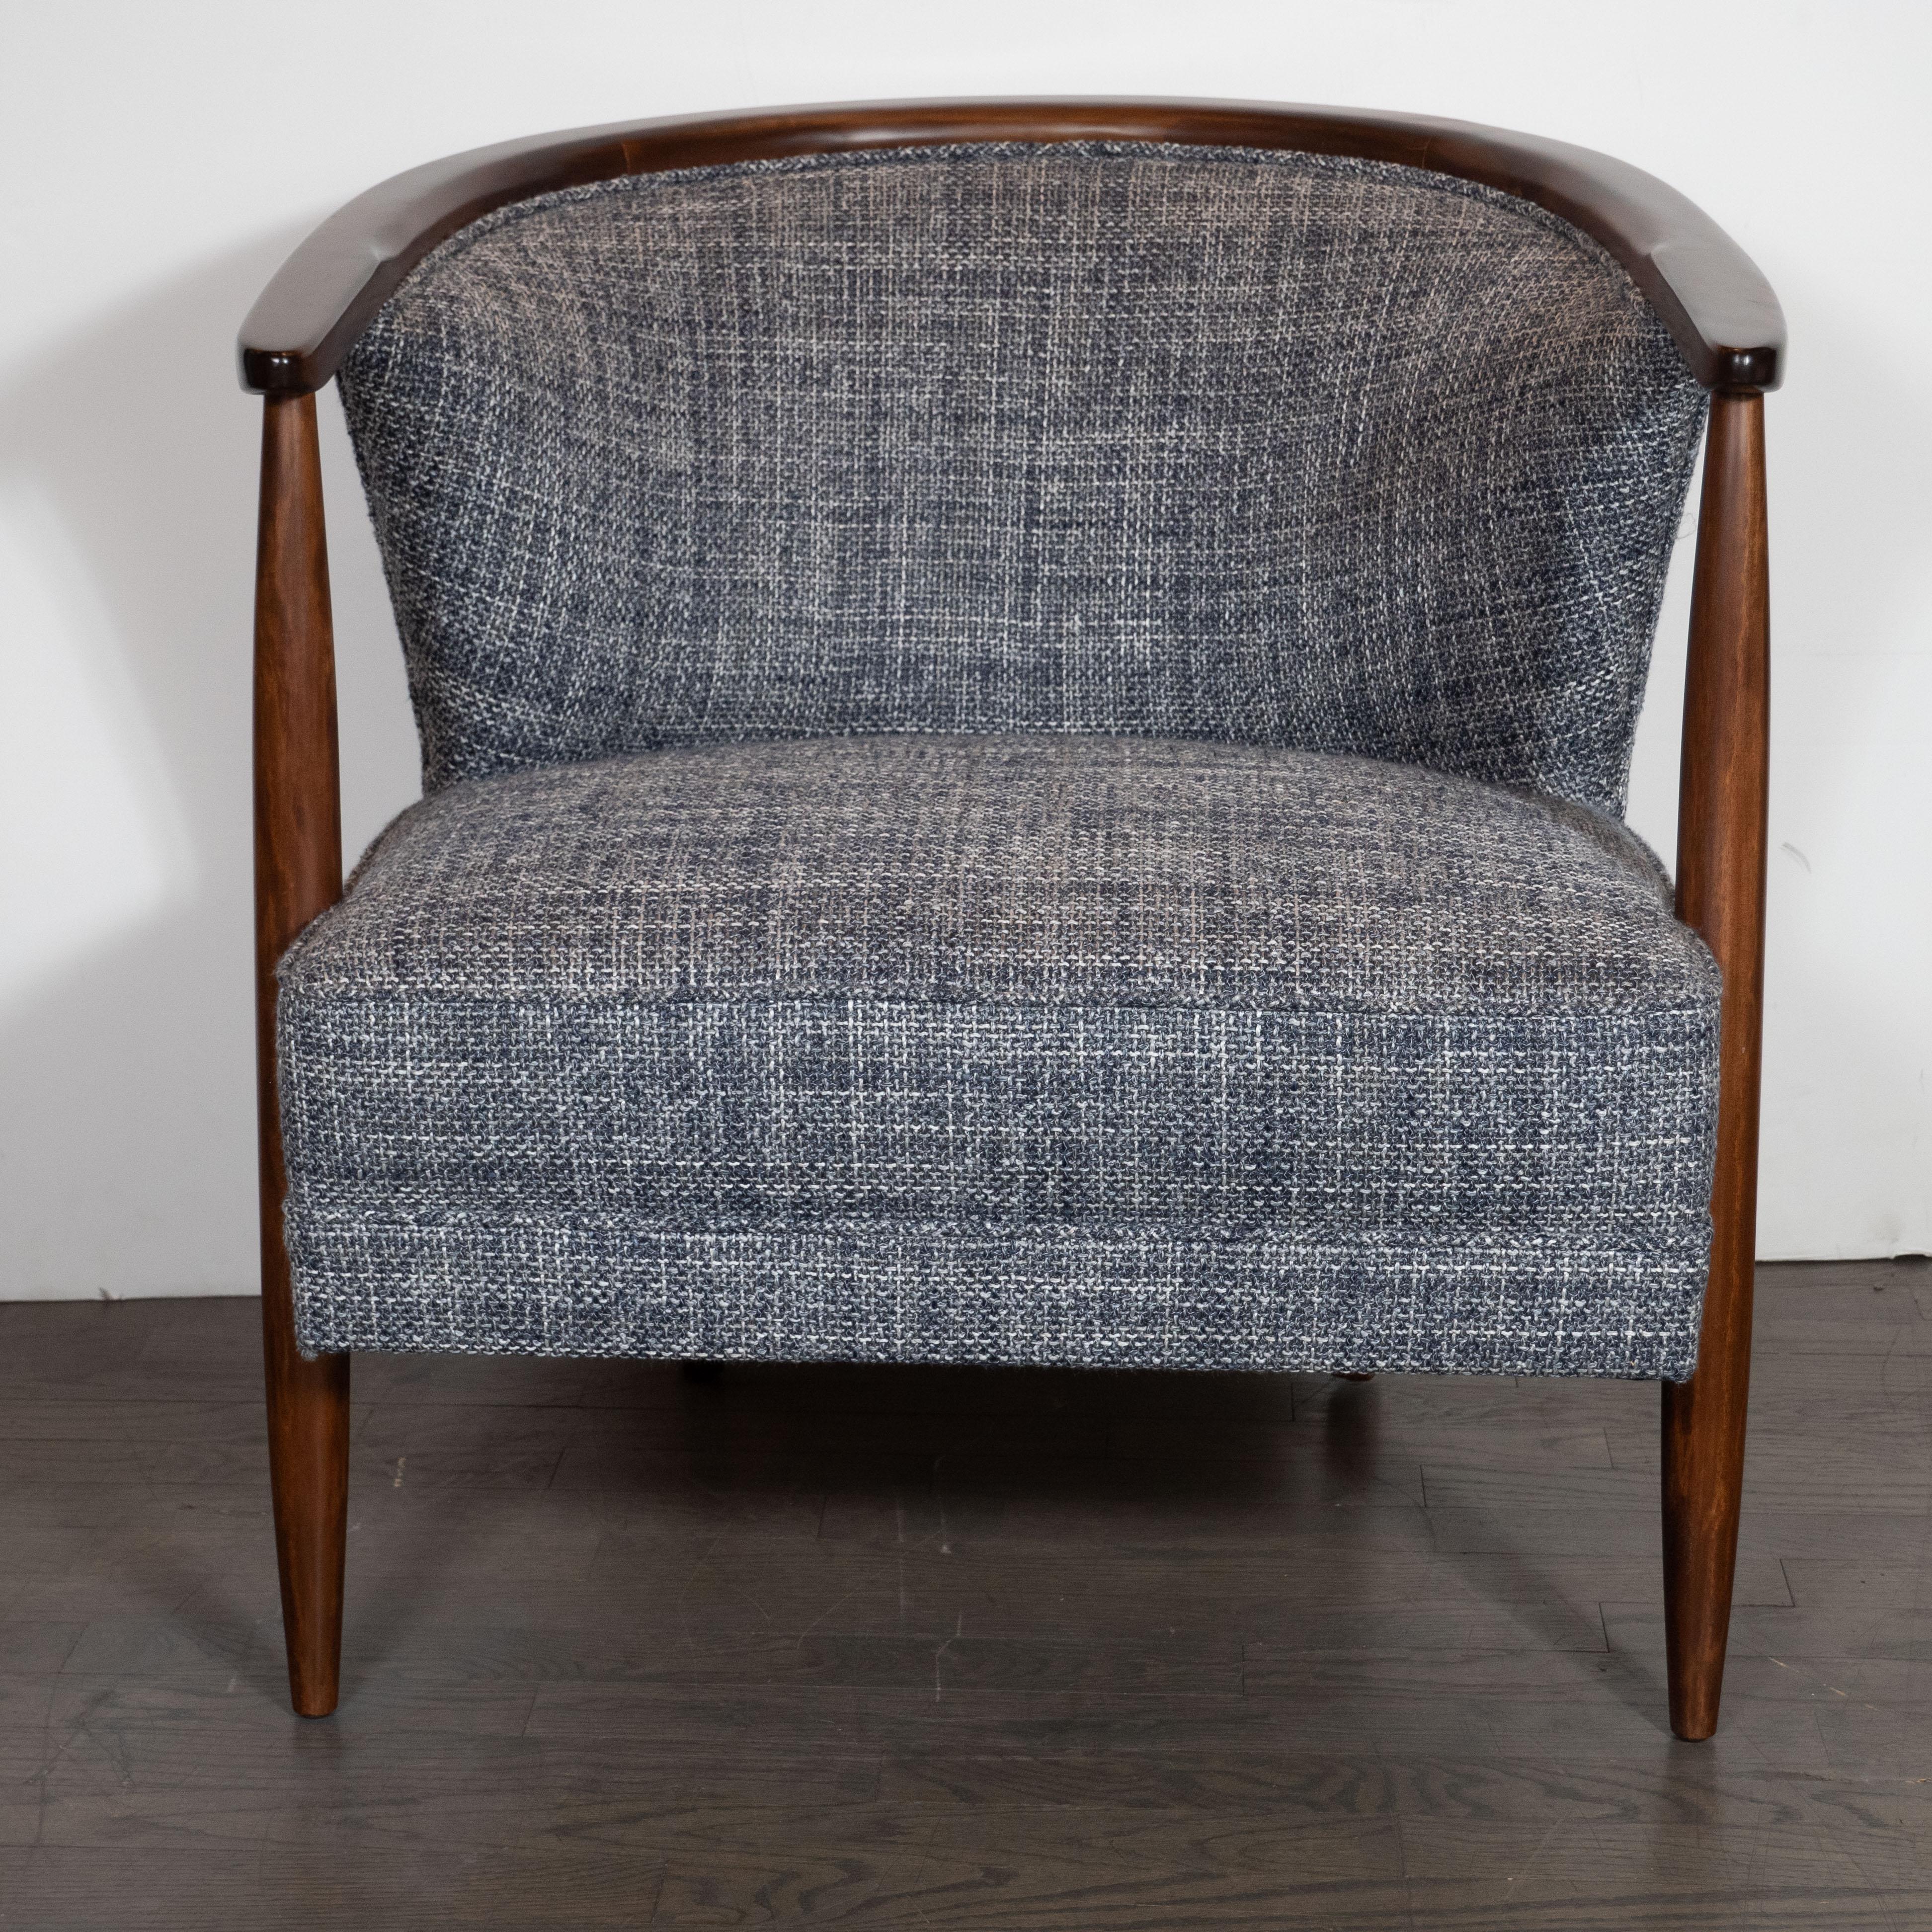 Mid-Century Modern Midcentury Barrel Back Chairs in Handrubbed Walnut with Rectilinear Upholstery